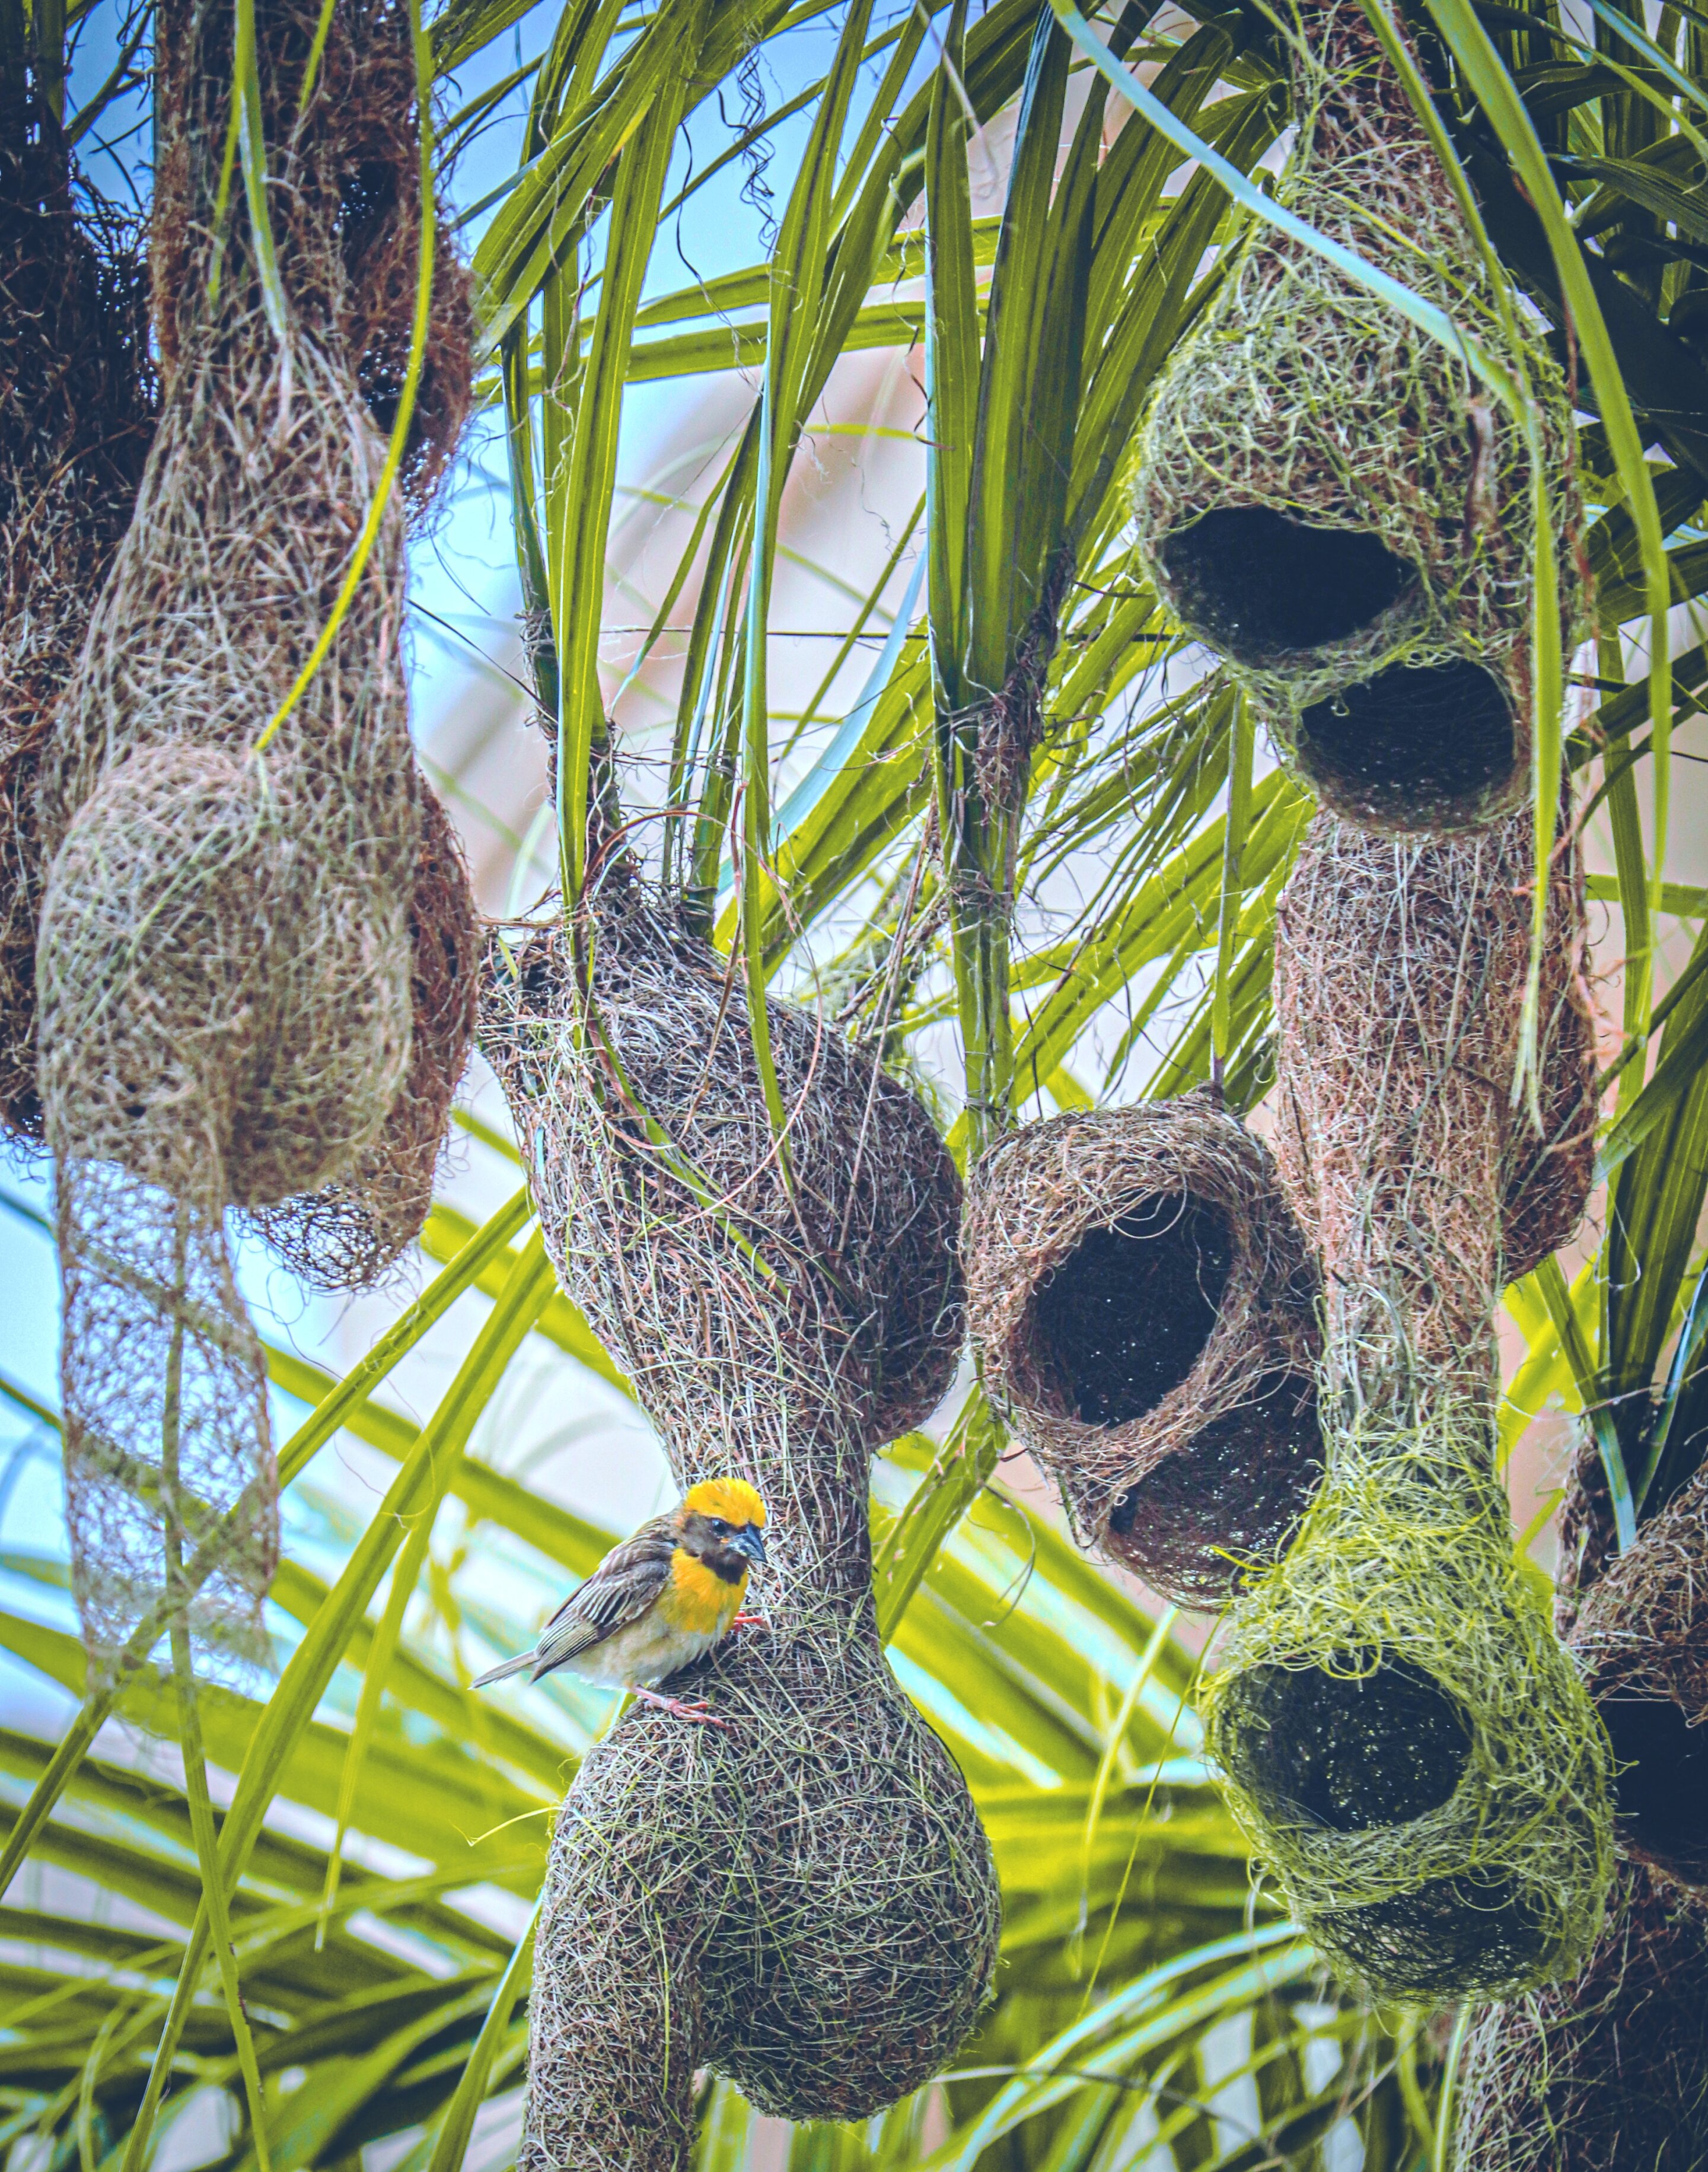 New study finds birds build hanging-nests to protect offspring